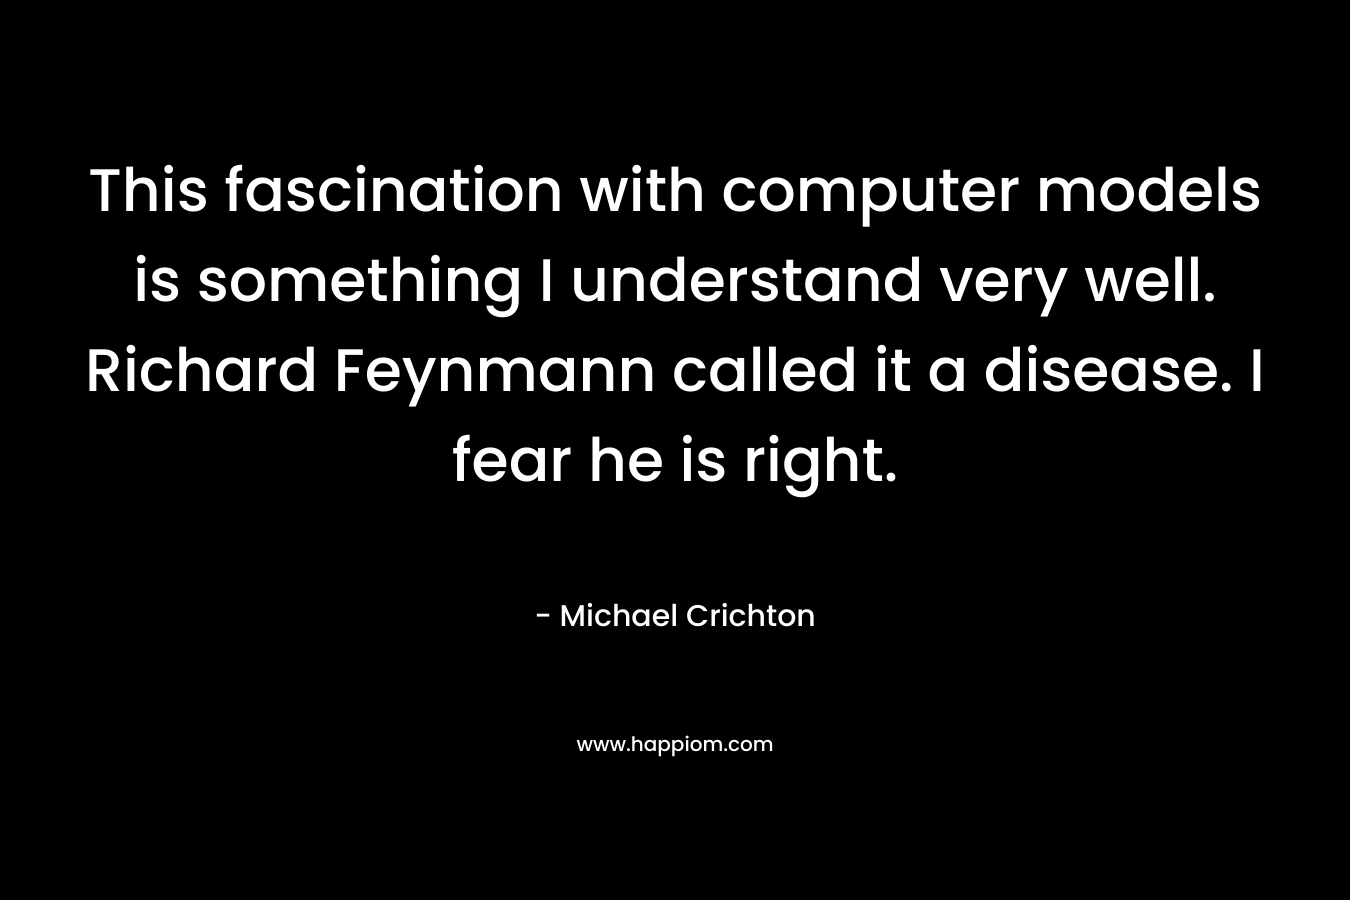 This fascination with computer models is something I understand very well. Richard Feynmann called it a disease. I fear he is right.